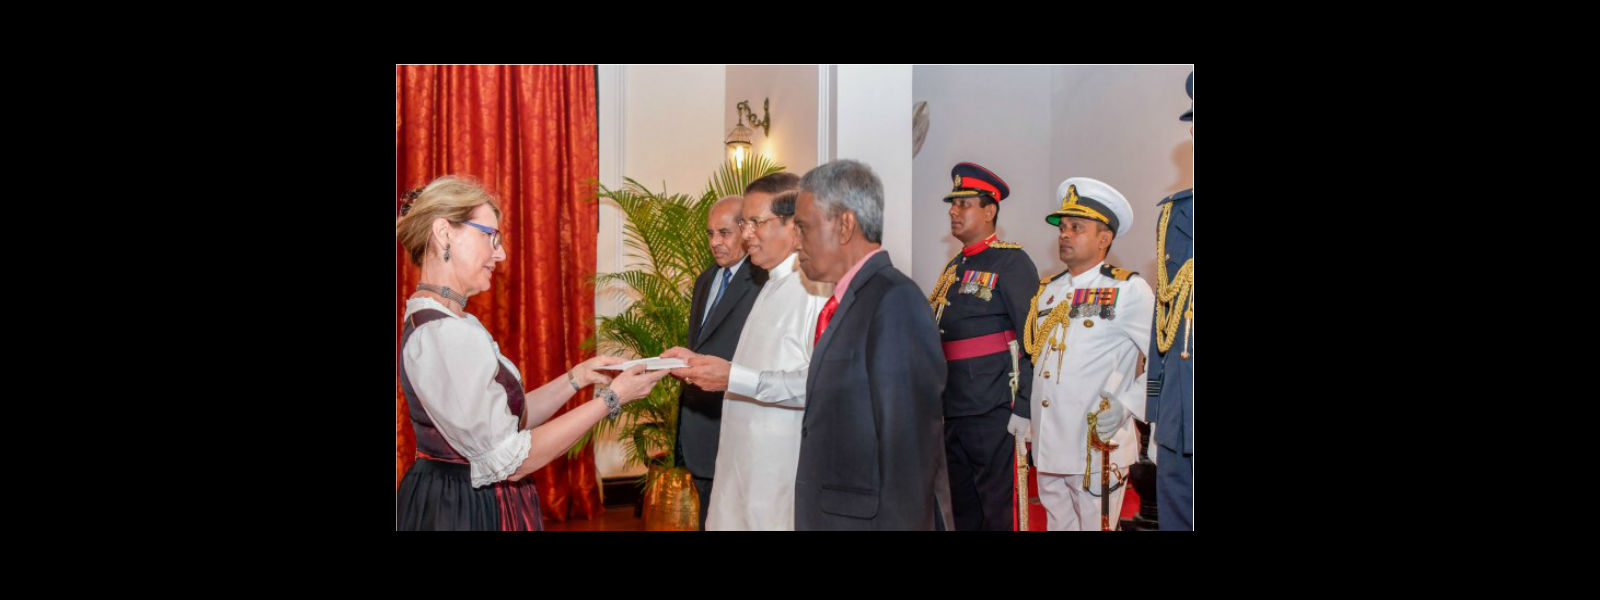 New envoys present credentials to President